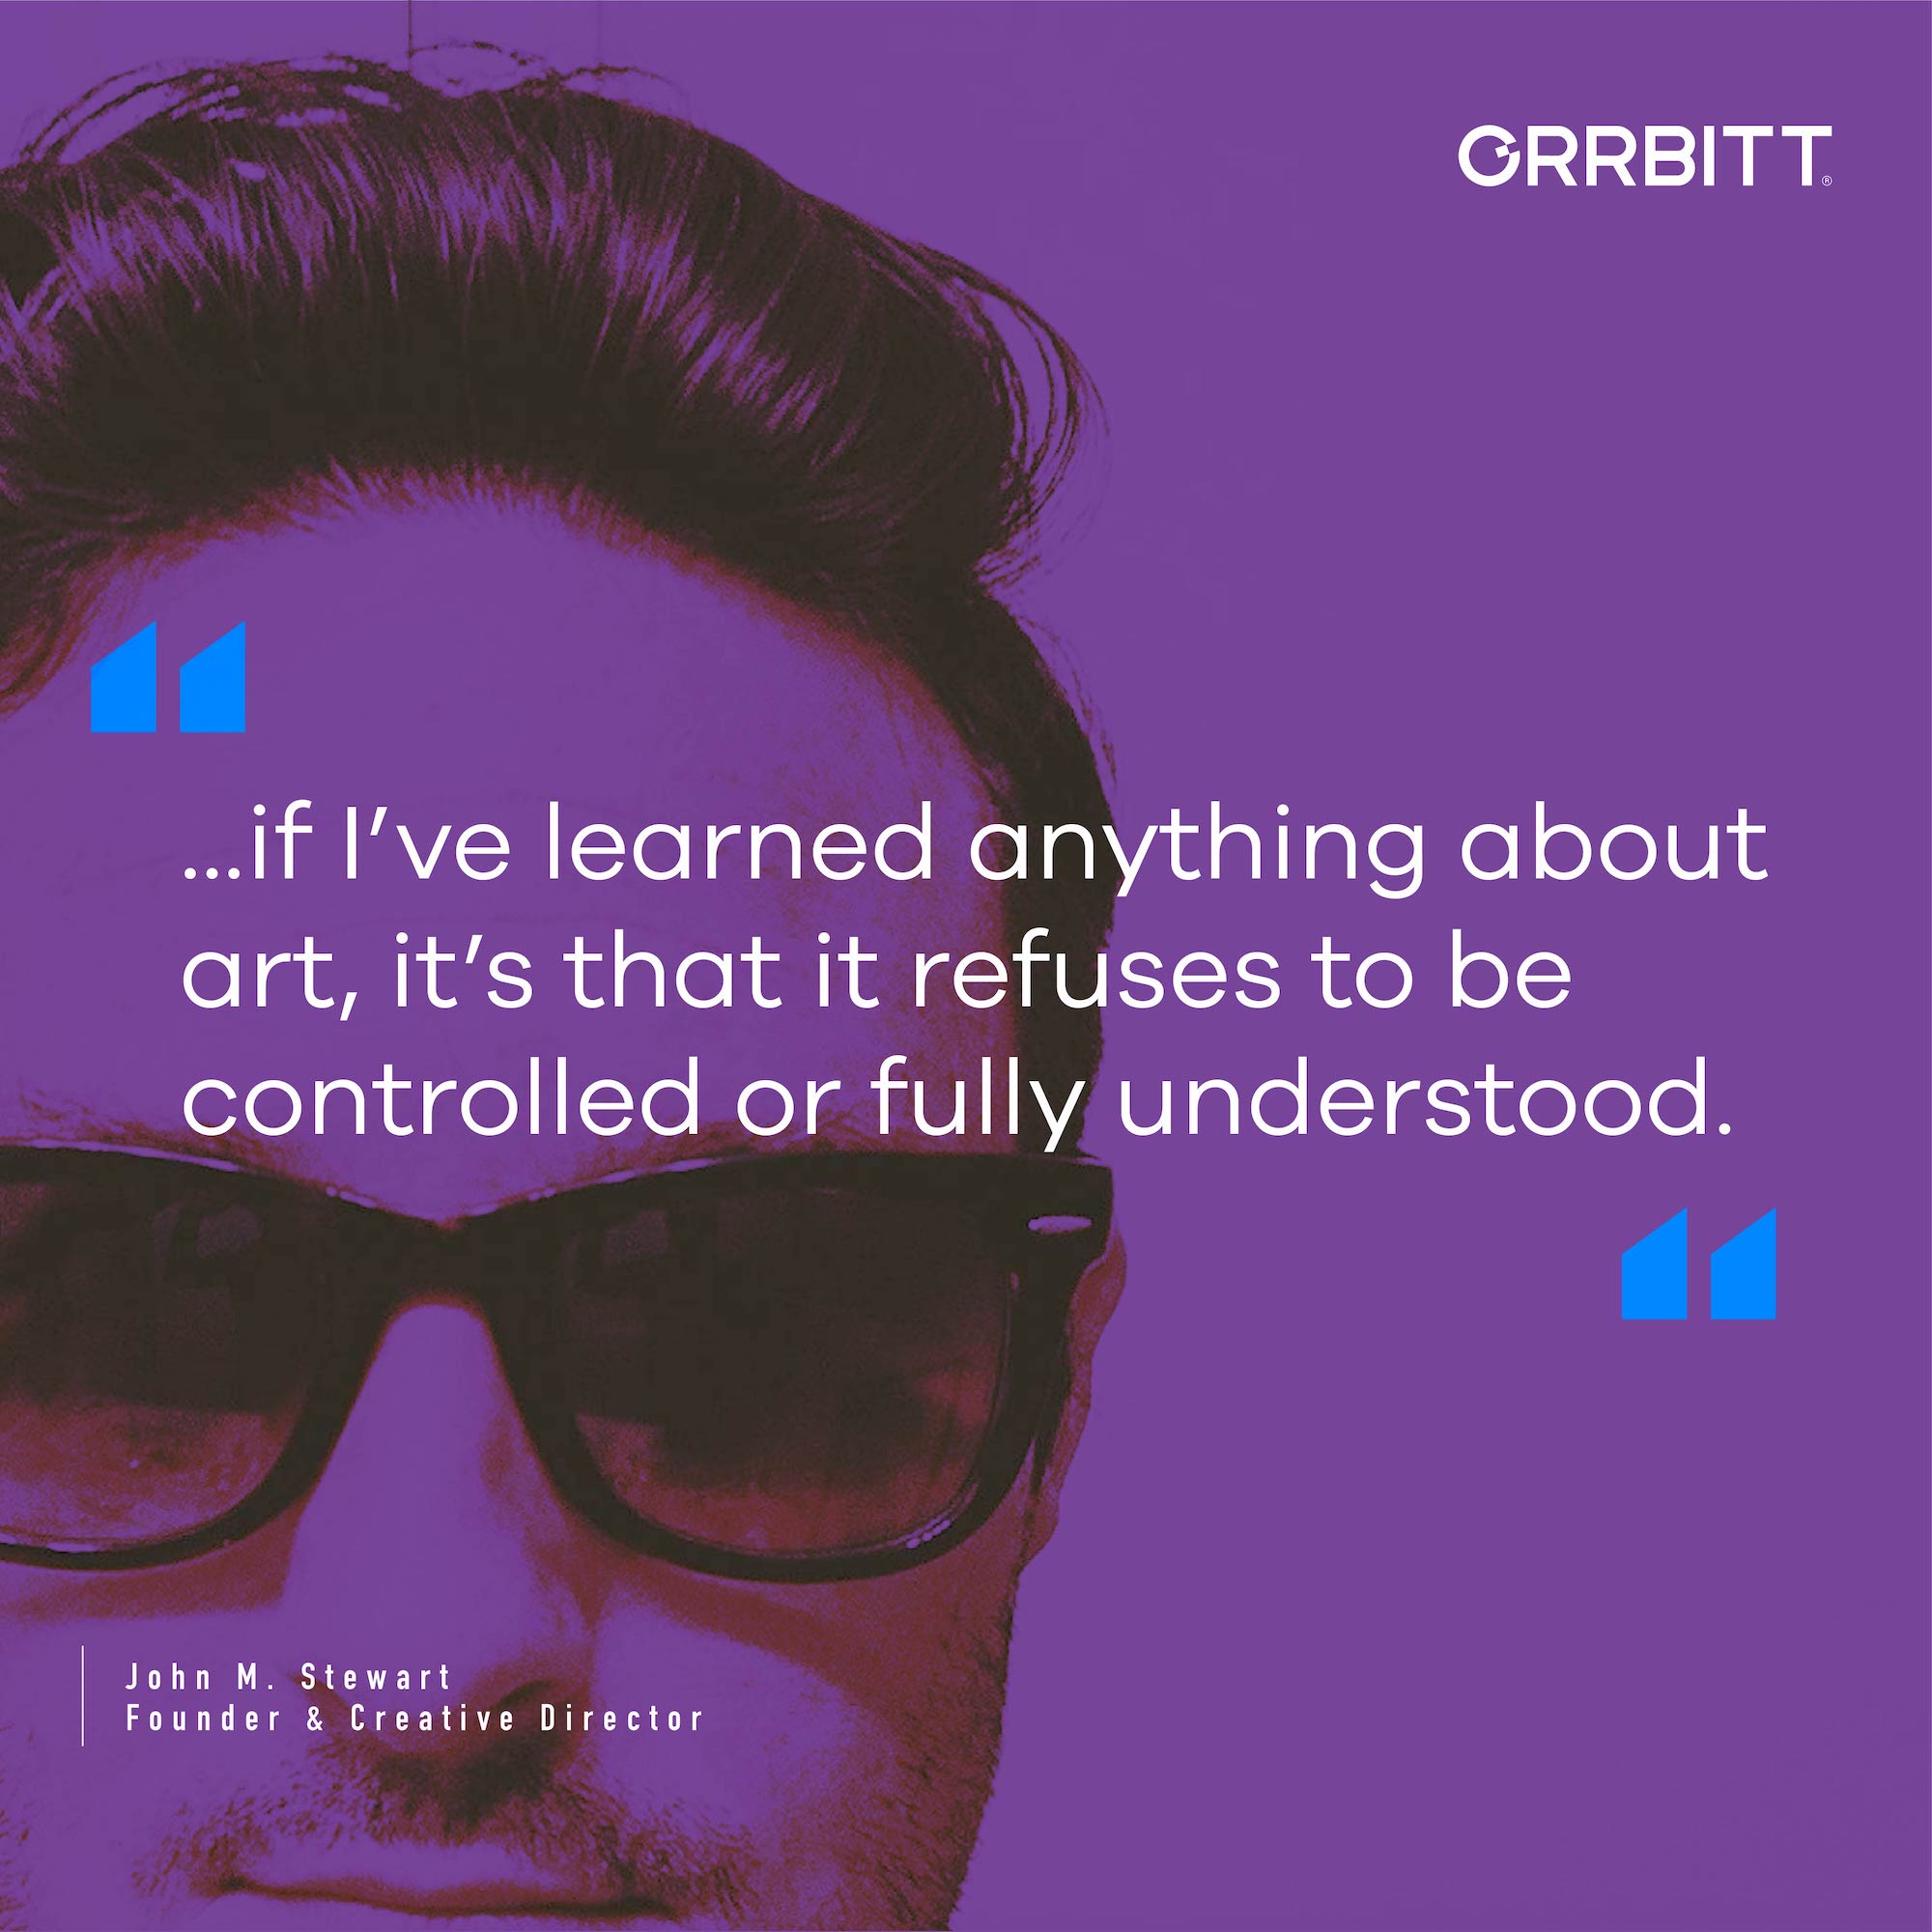 quote from John Stewart, founder & Creative Director at Orrbitt: "...if I've learned anything about art, it's that it refuses to be controlled or fully understood."